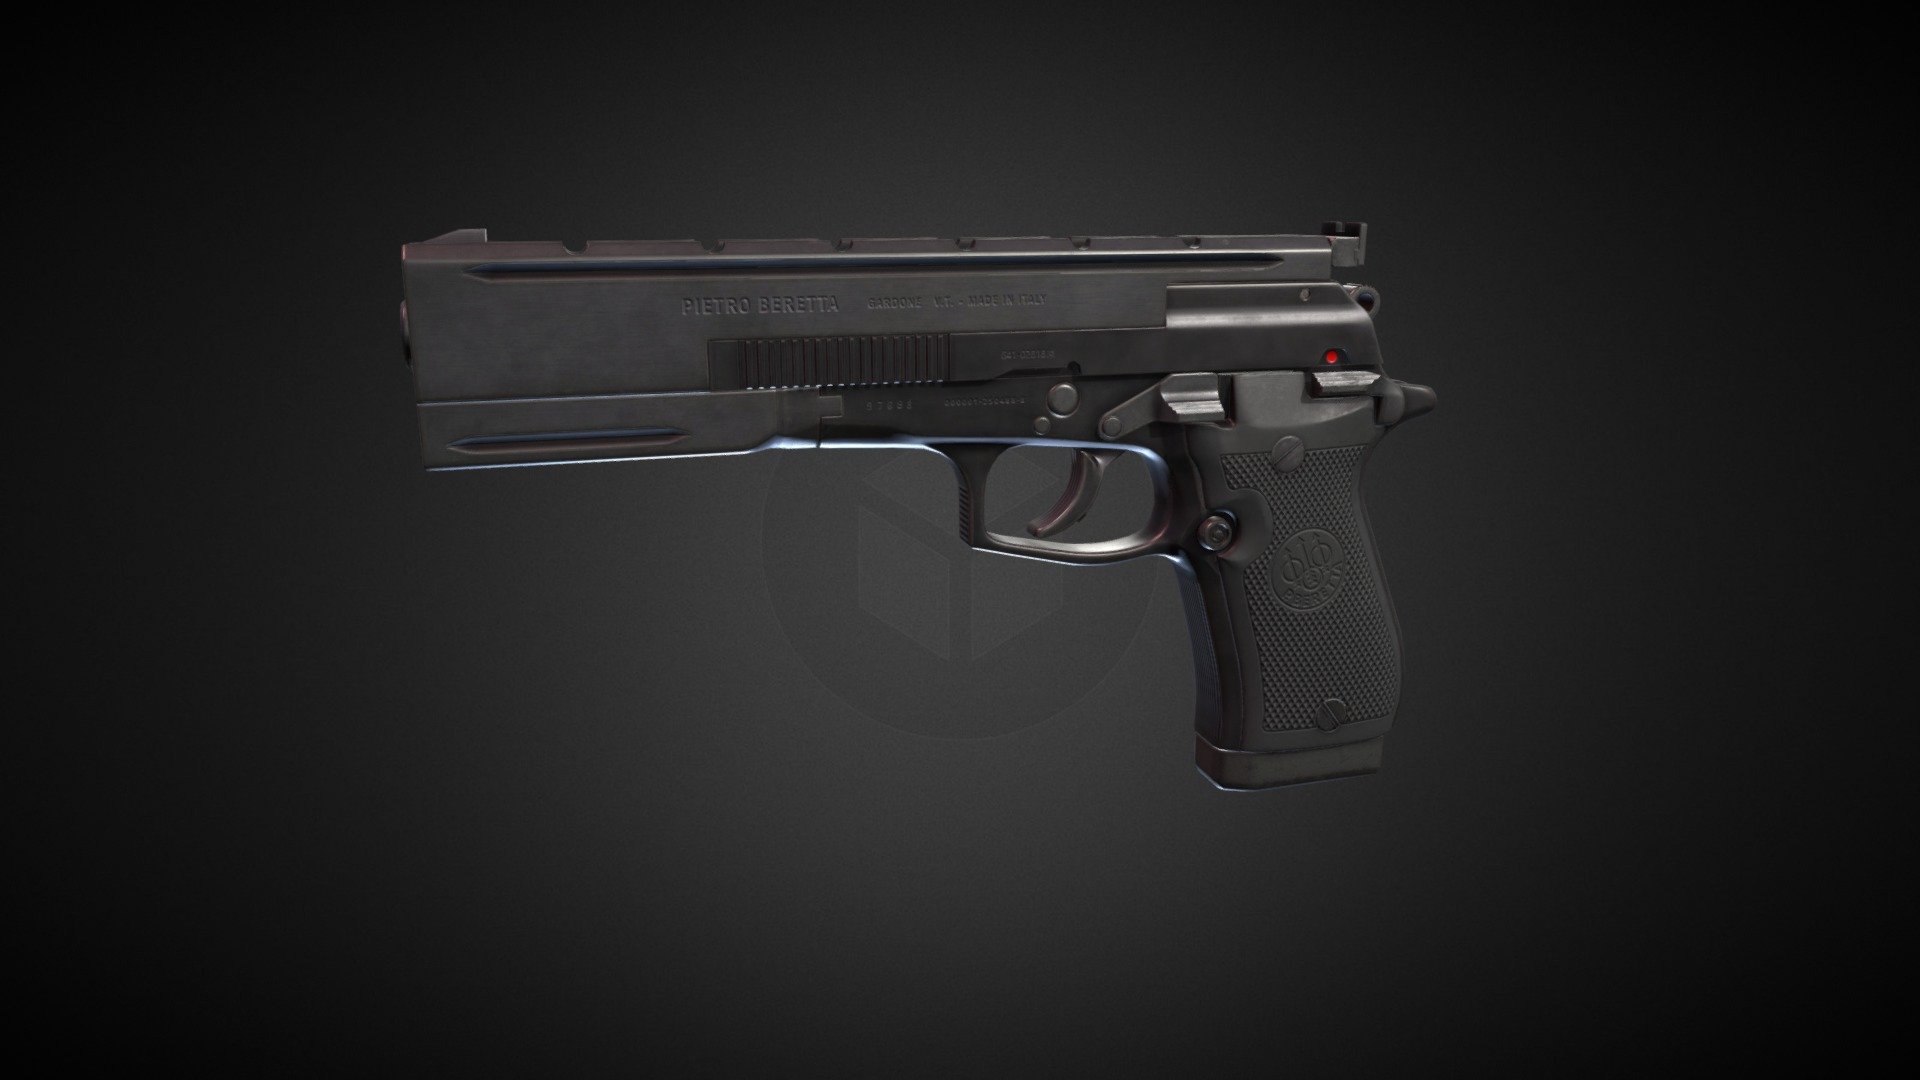 Its a Beretta cheetach with robocop parts glued to it&hellip; Its look cool even if its really simple pistol.

Model is rigged, but there is also version with separate parts. It have two PBR materials in 4K, Black and steel colors included.
Verts:
Tris:

Made in Blender.

PS. originally its chambered in 22LR but I modified magazine, bullet and markings to .380ACP as it was project model 3d model